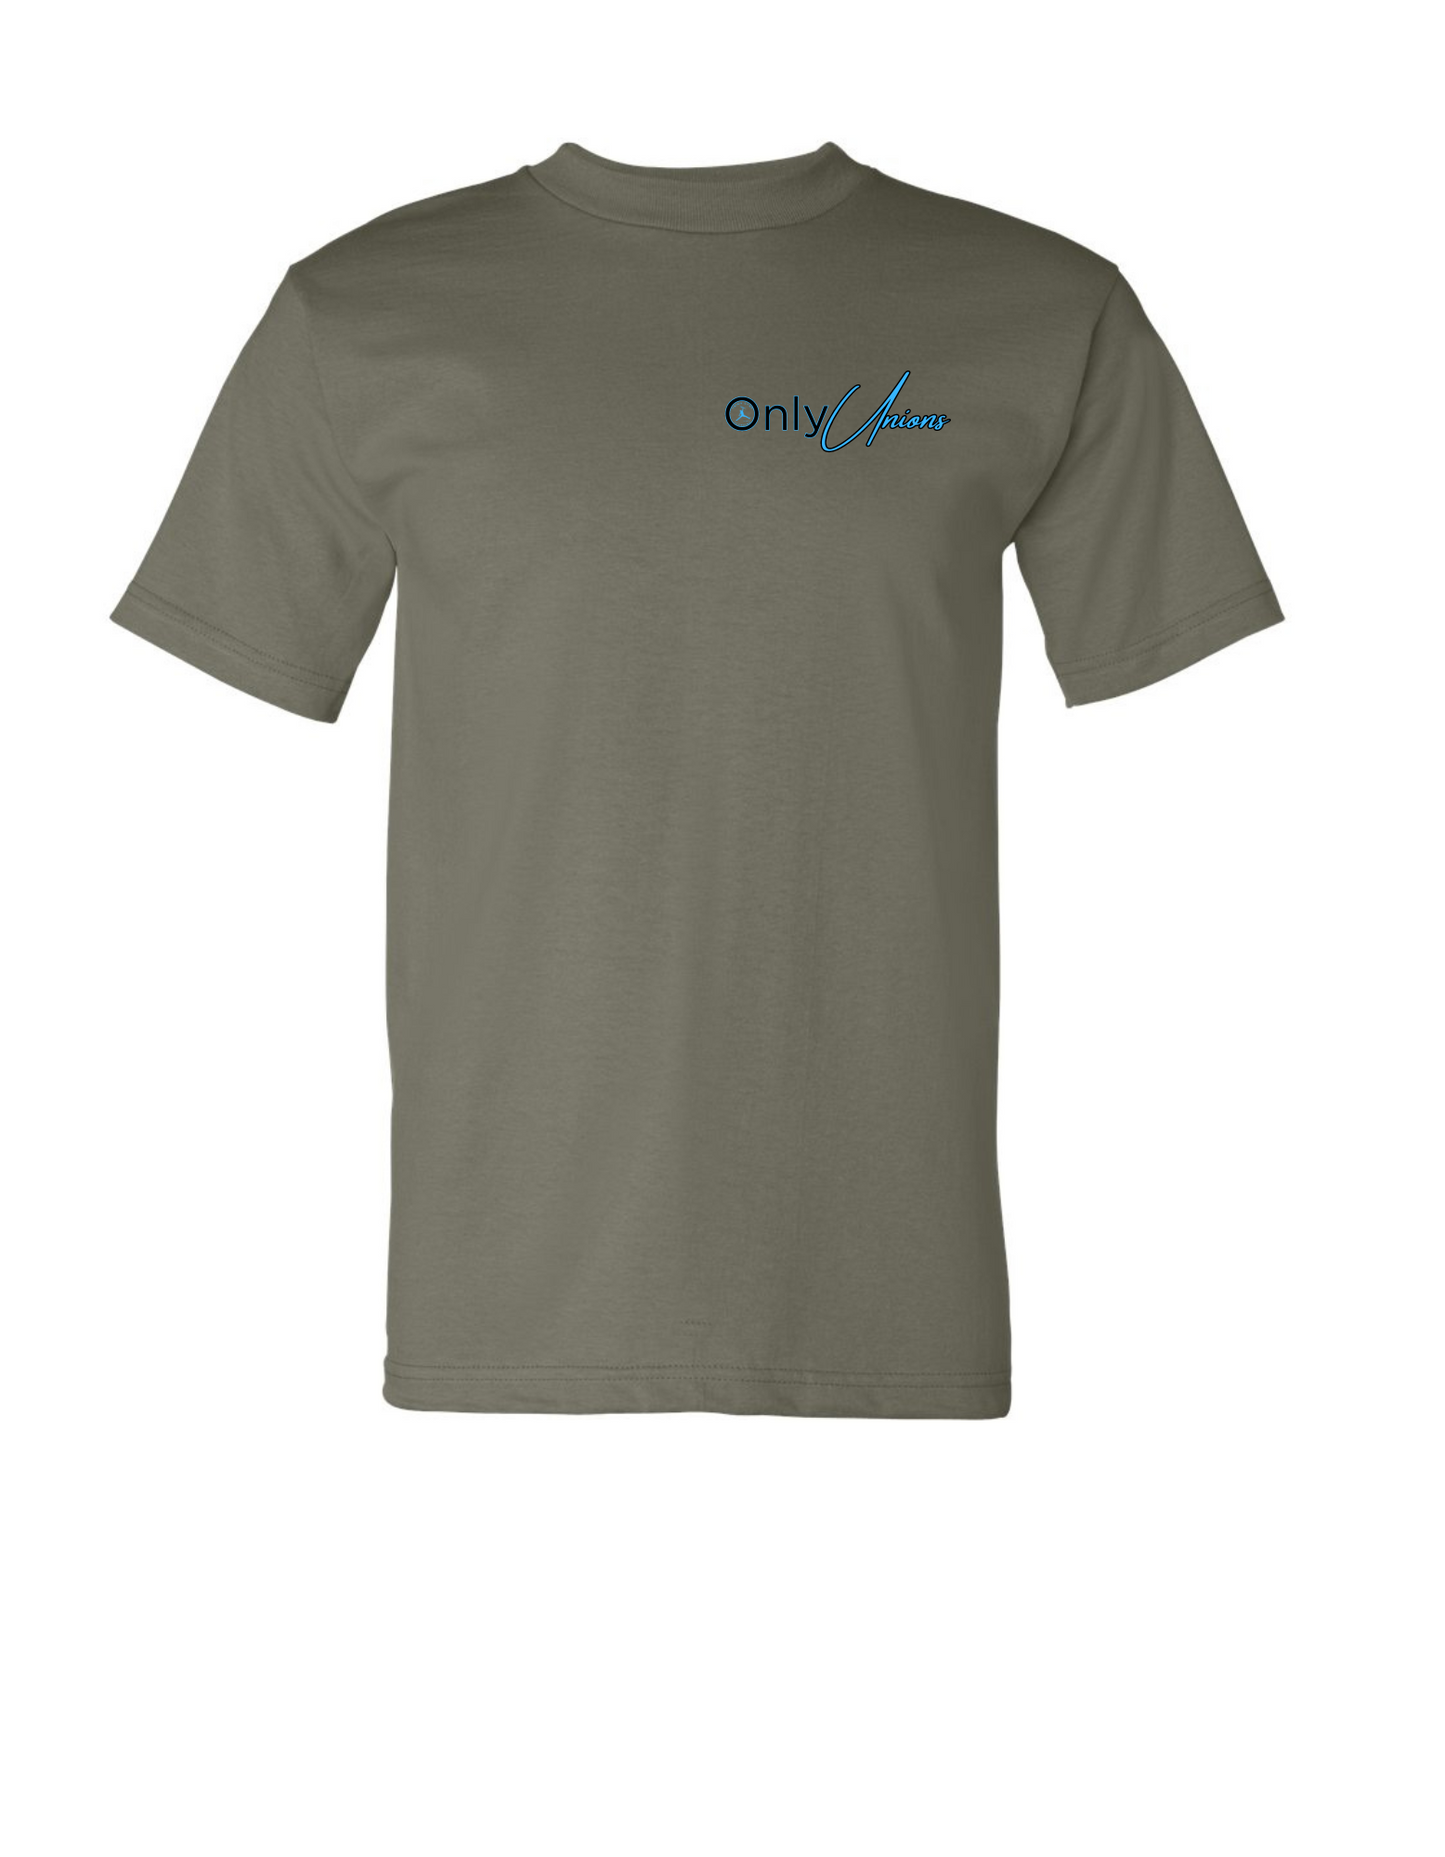 "ONLY UNIONS" T-SHIRT